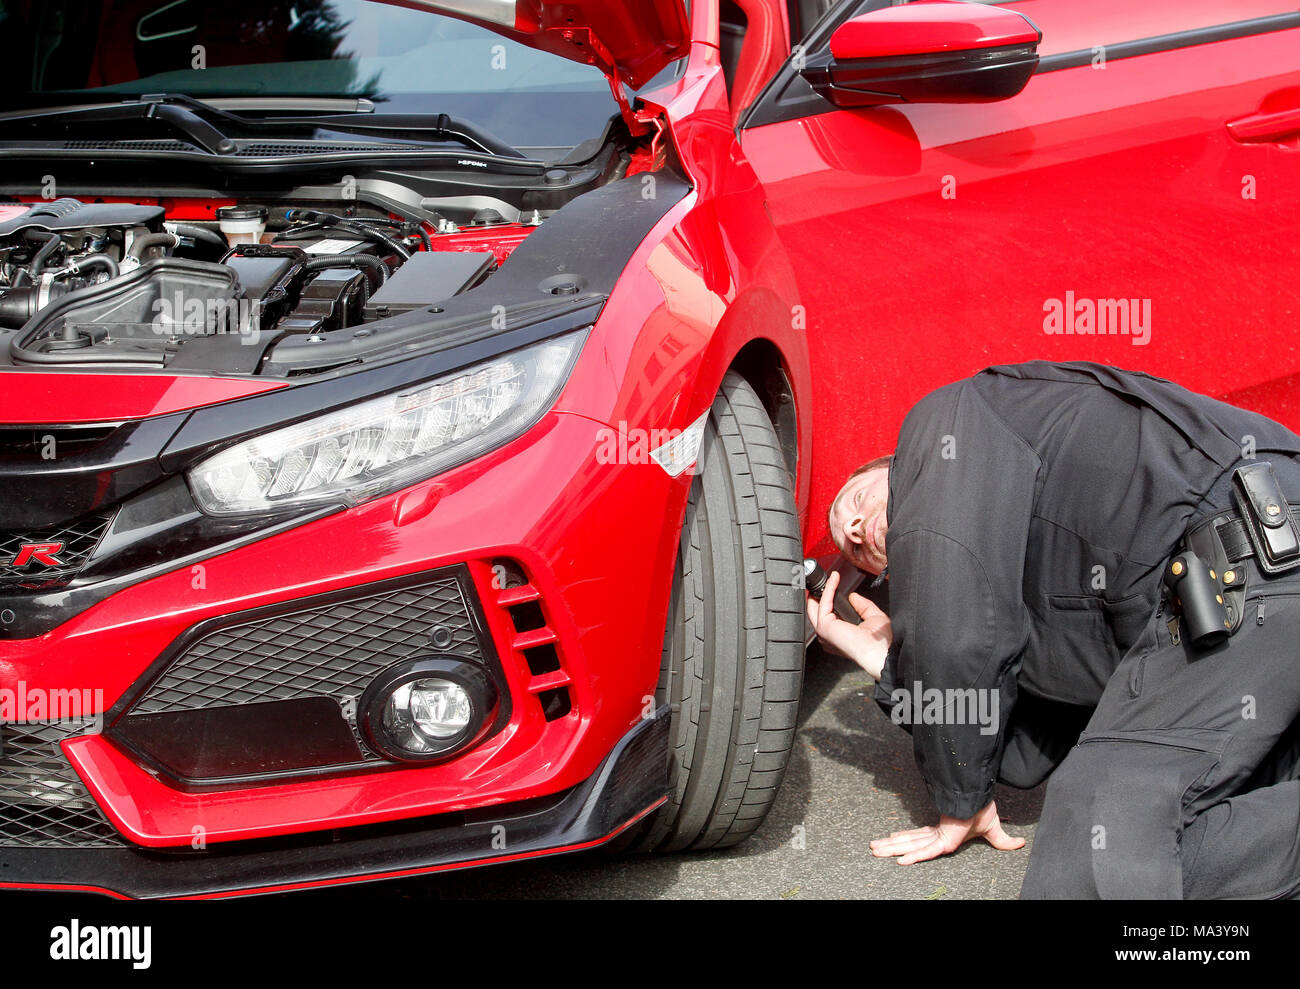 30 March 2018, Germany, Bochum: A police officer checks a car at a large meet-up of car tuners. Photo: Roland Weihrauch/dpa - ATTENTION EDITORS: License plate blurred for legal reasons. Stock Photo